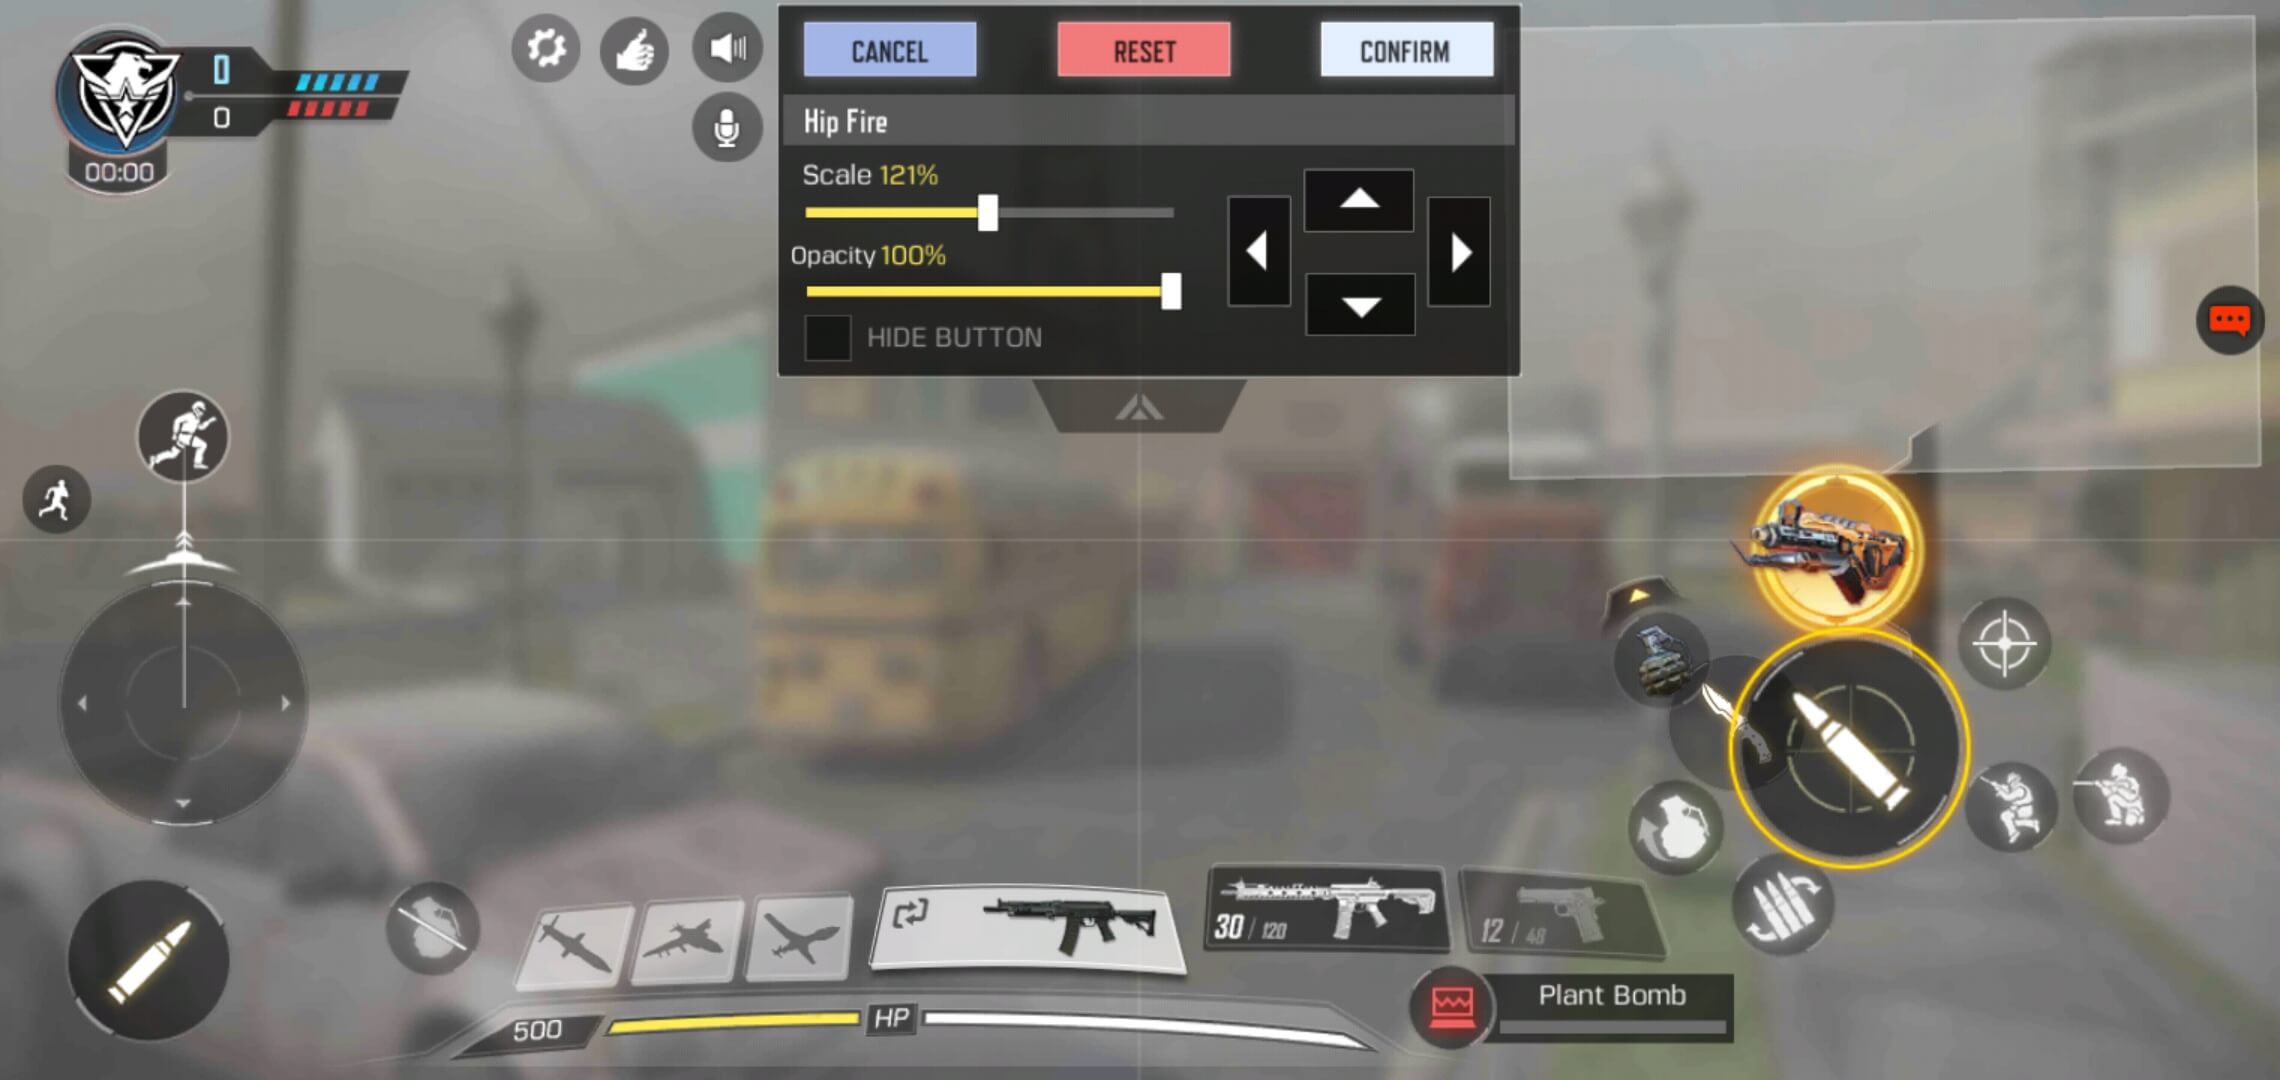 Customizing your Battle Screen in Call of Duty: Mobile ... - 